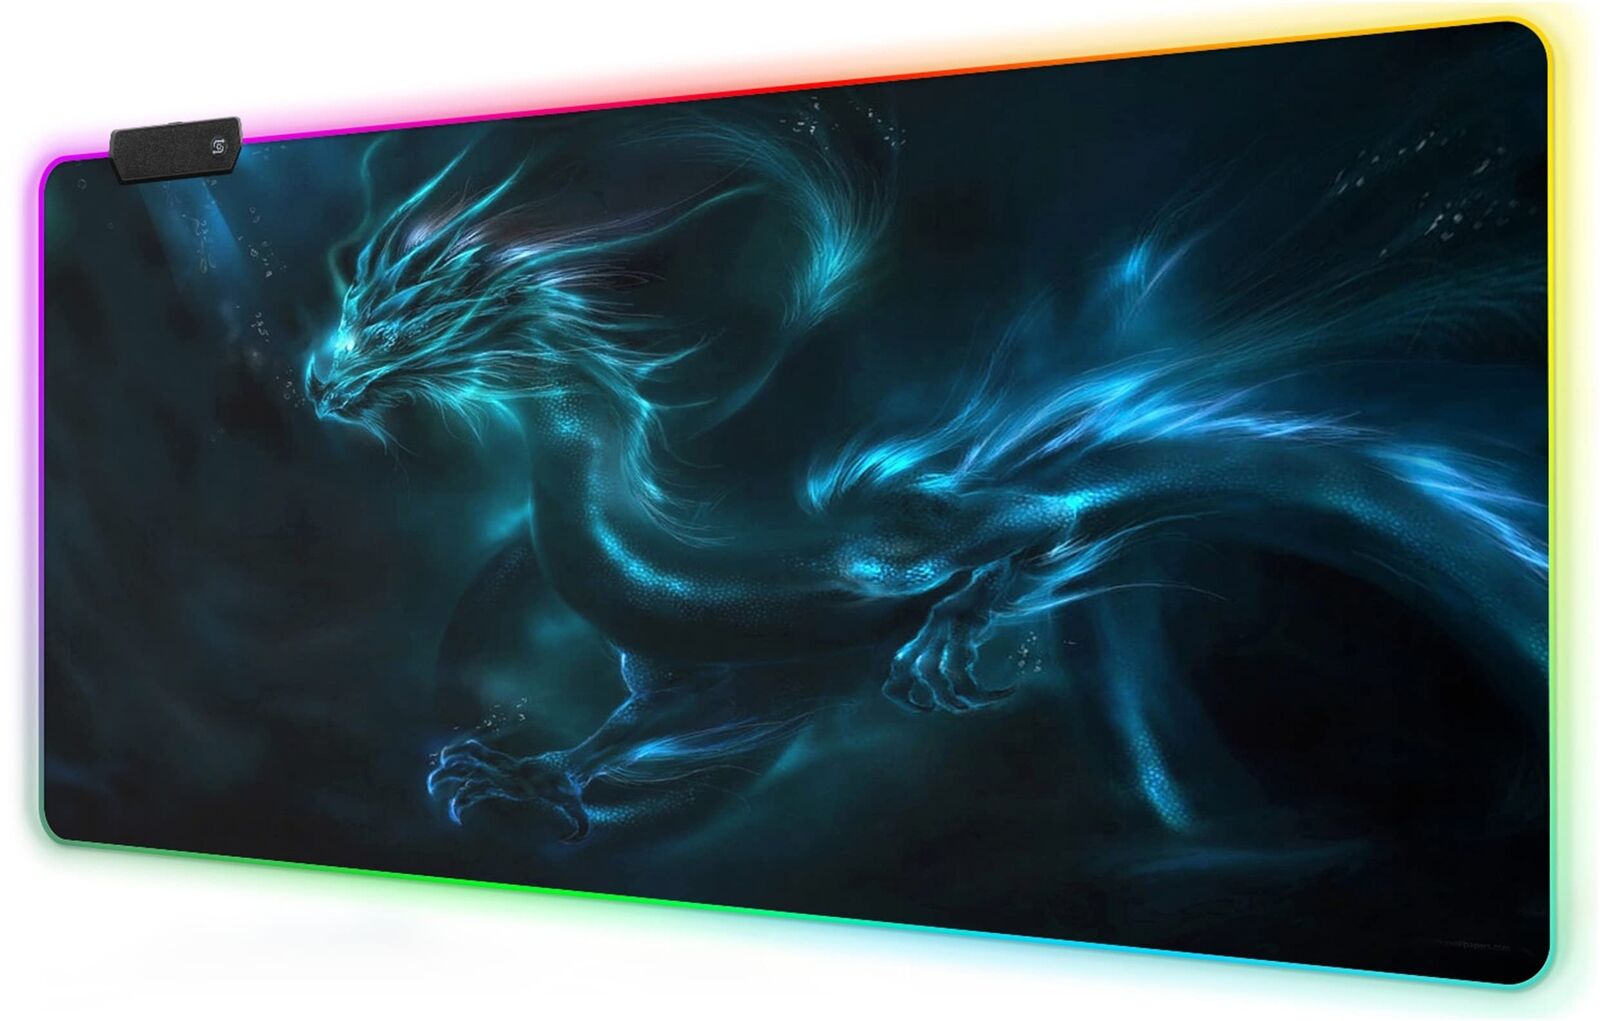 RGB Gaming Mouse Pad - Extra Large XXL LED Gaming Mouse Mat with Custom Desig...